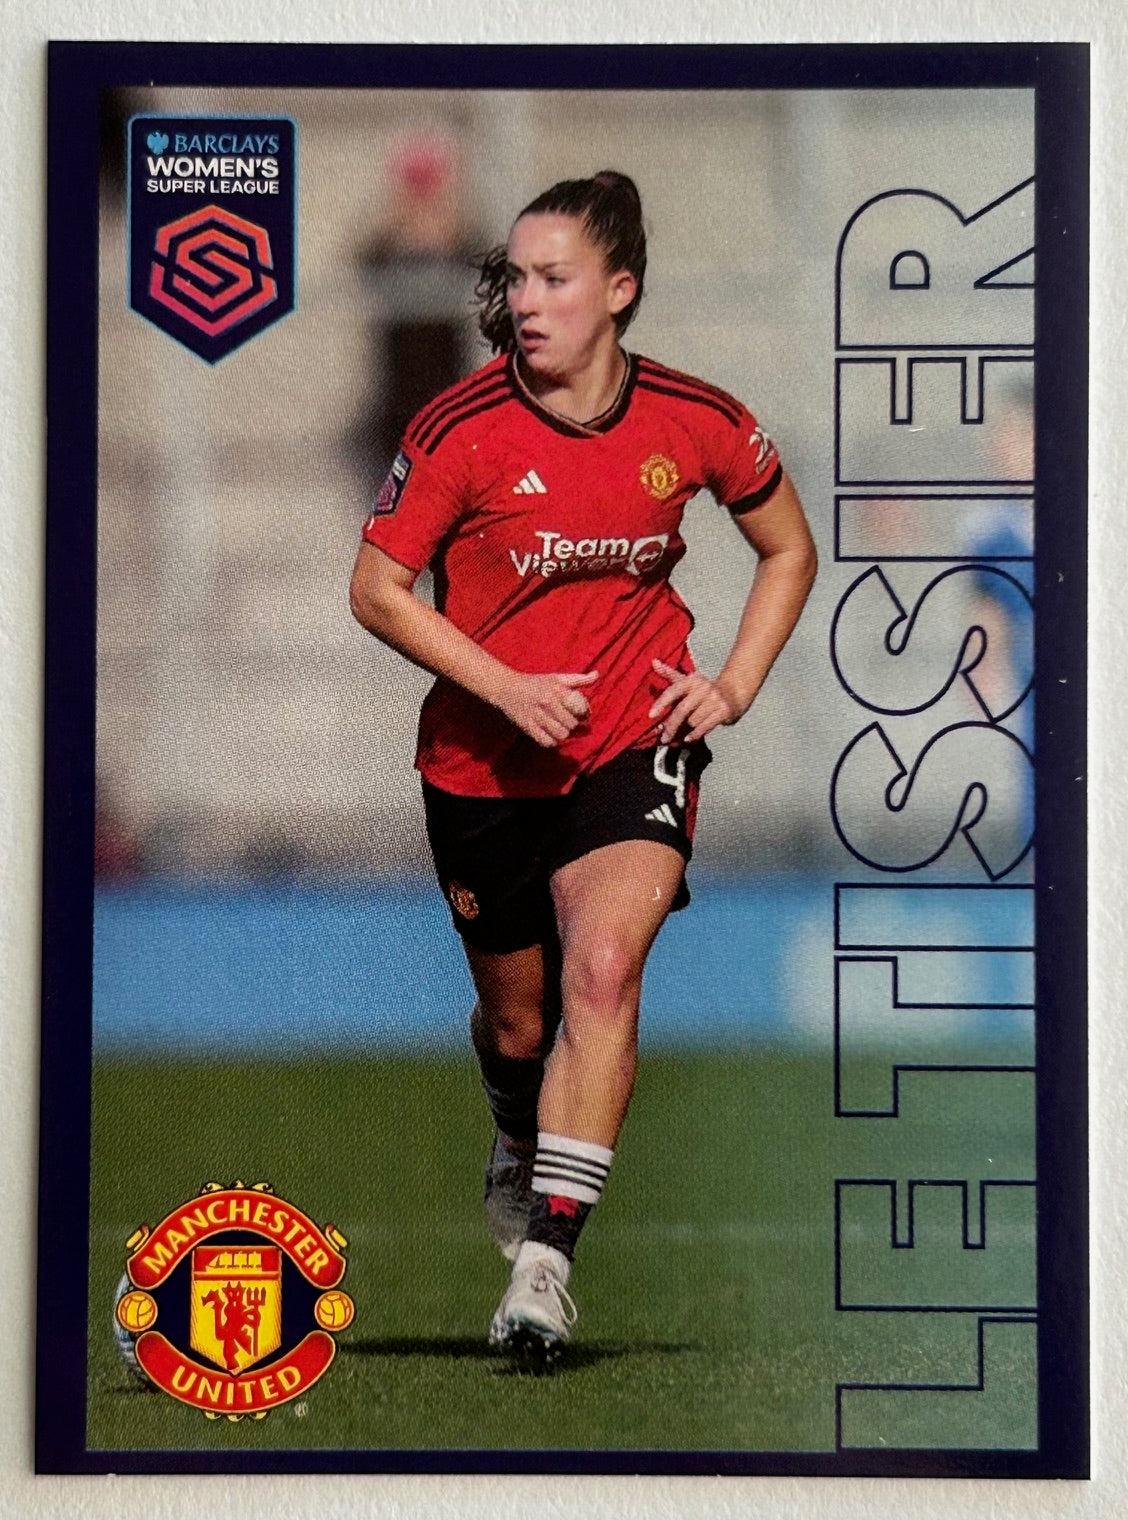 Panini Barclays Women's Super League 2024 - Single ONES TO WATCH Stickers (#266 - #277)